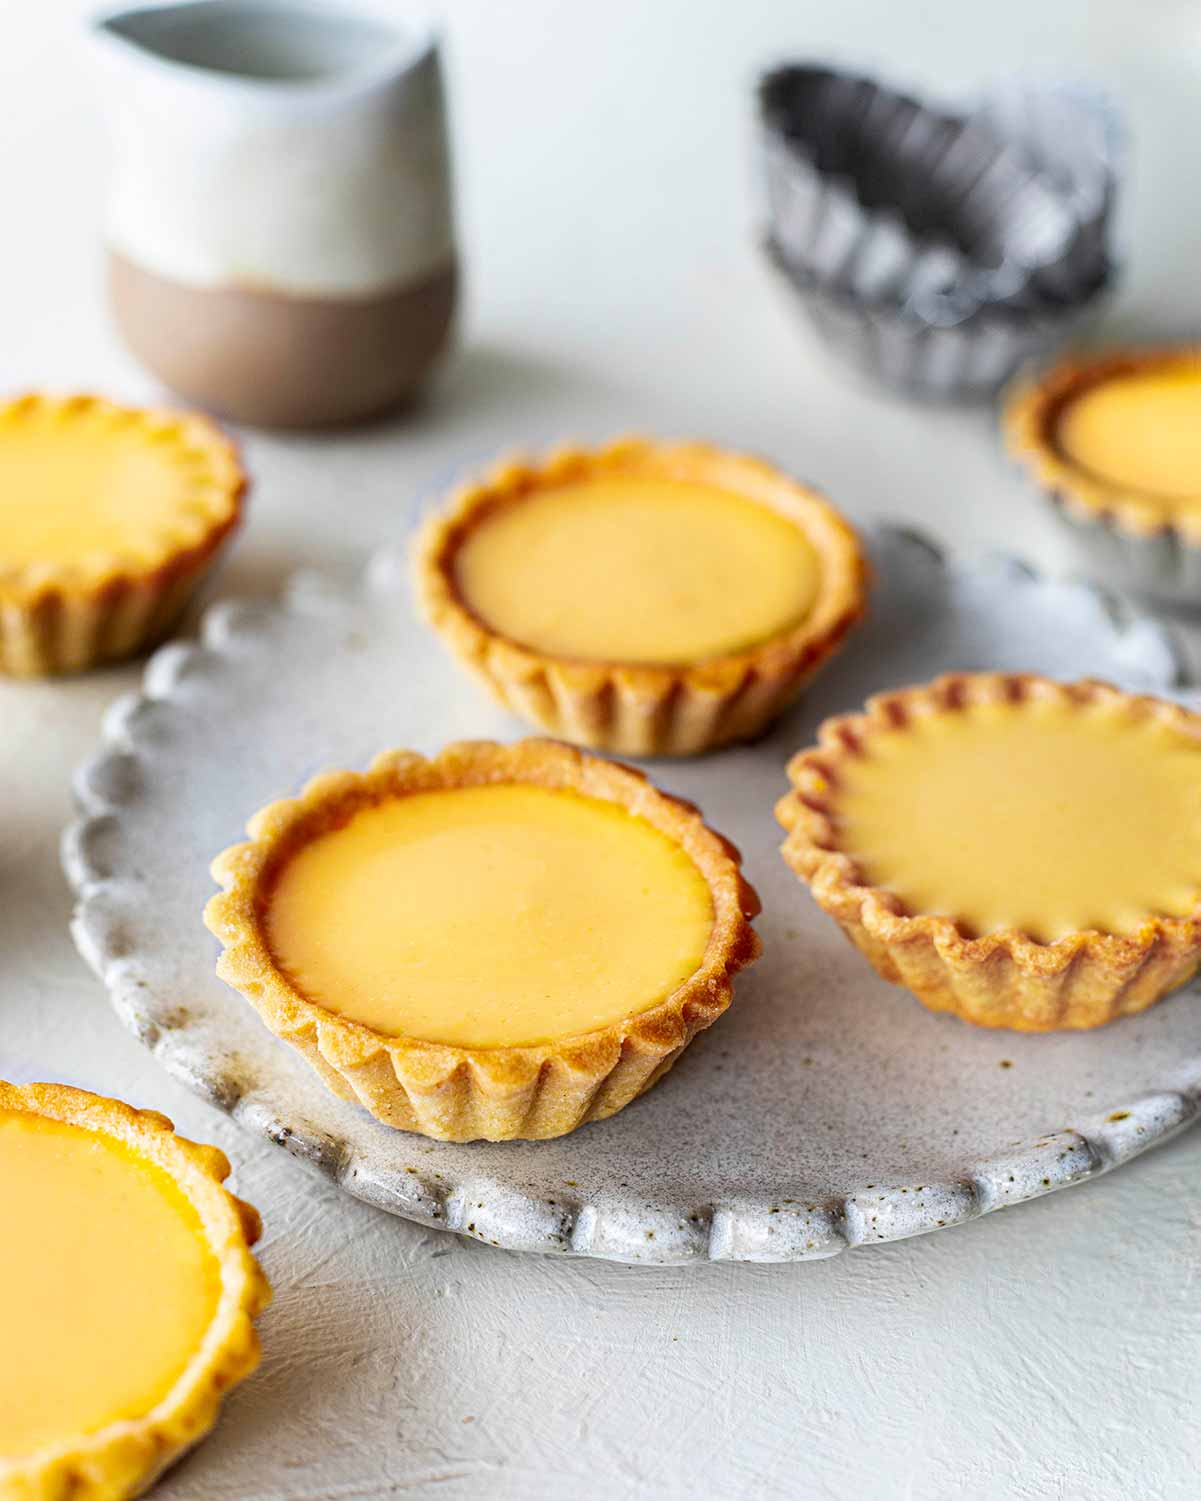 Multiple vegan egg tarts on a scalloped plate and around. Close up showing pretty crimped edges of one tart.